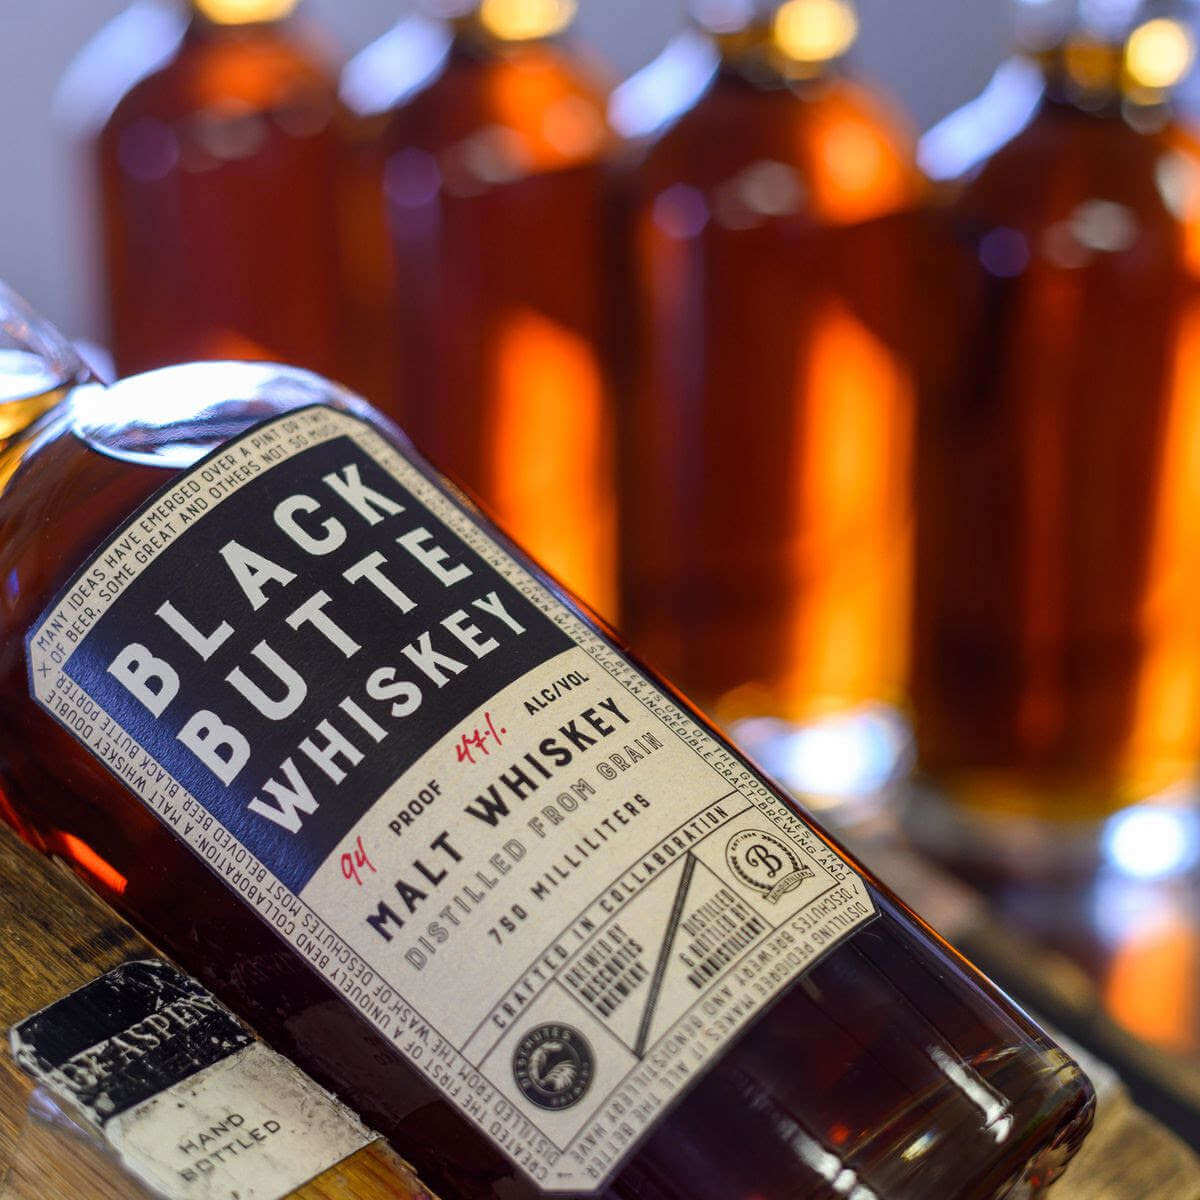 Deschutes Brewery and Bendistillery release Black Butte Whiskey 5-Year